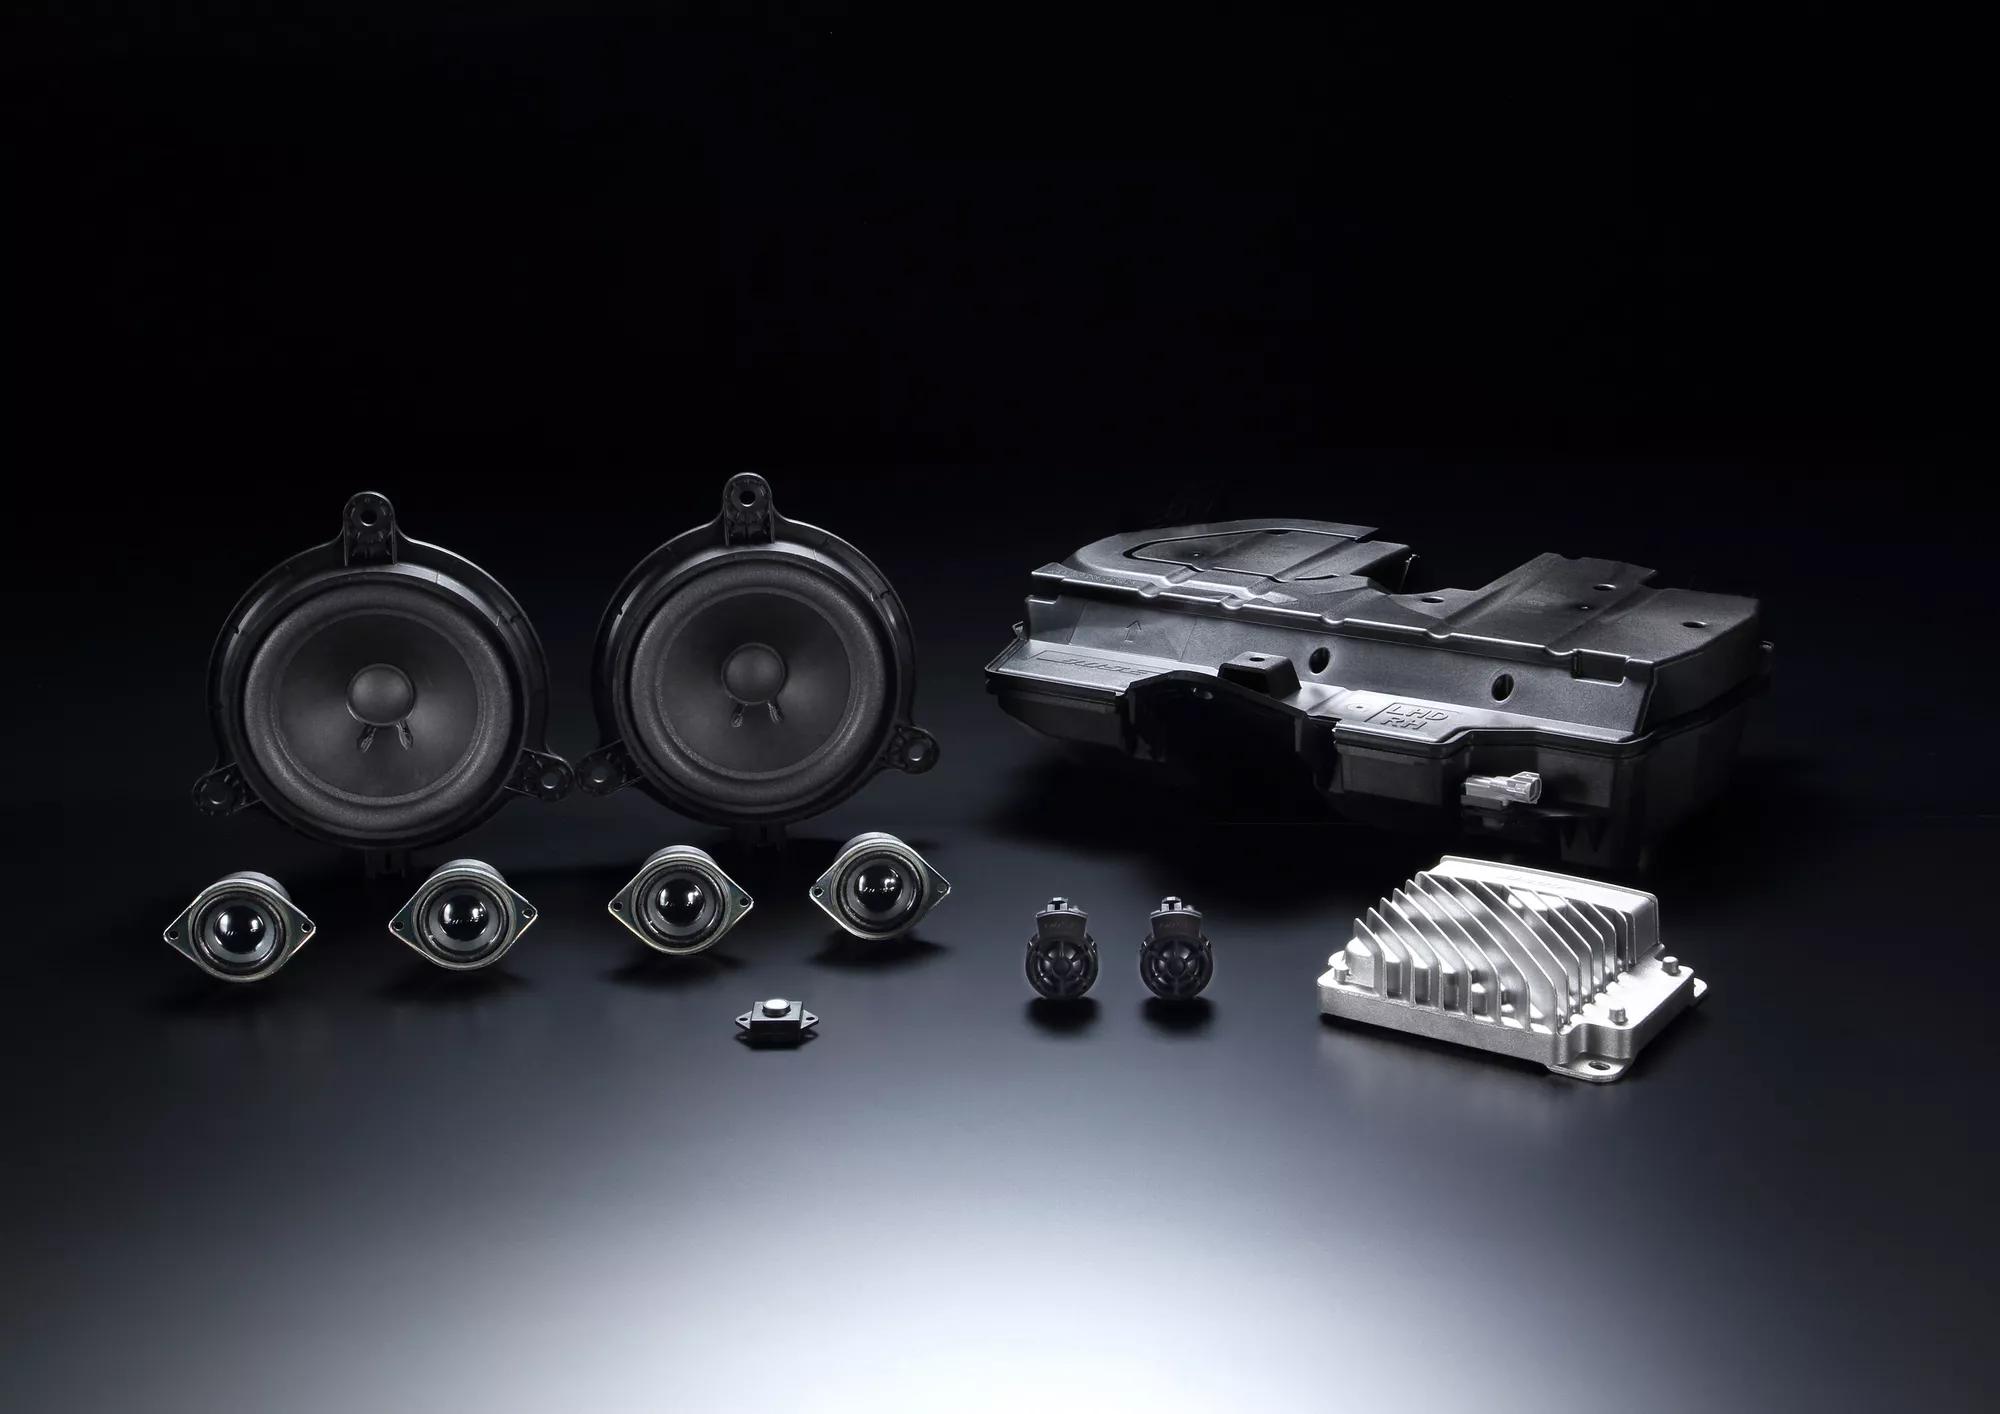 Bose sound system parts for the 2016 Mazda MX-5